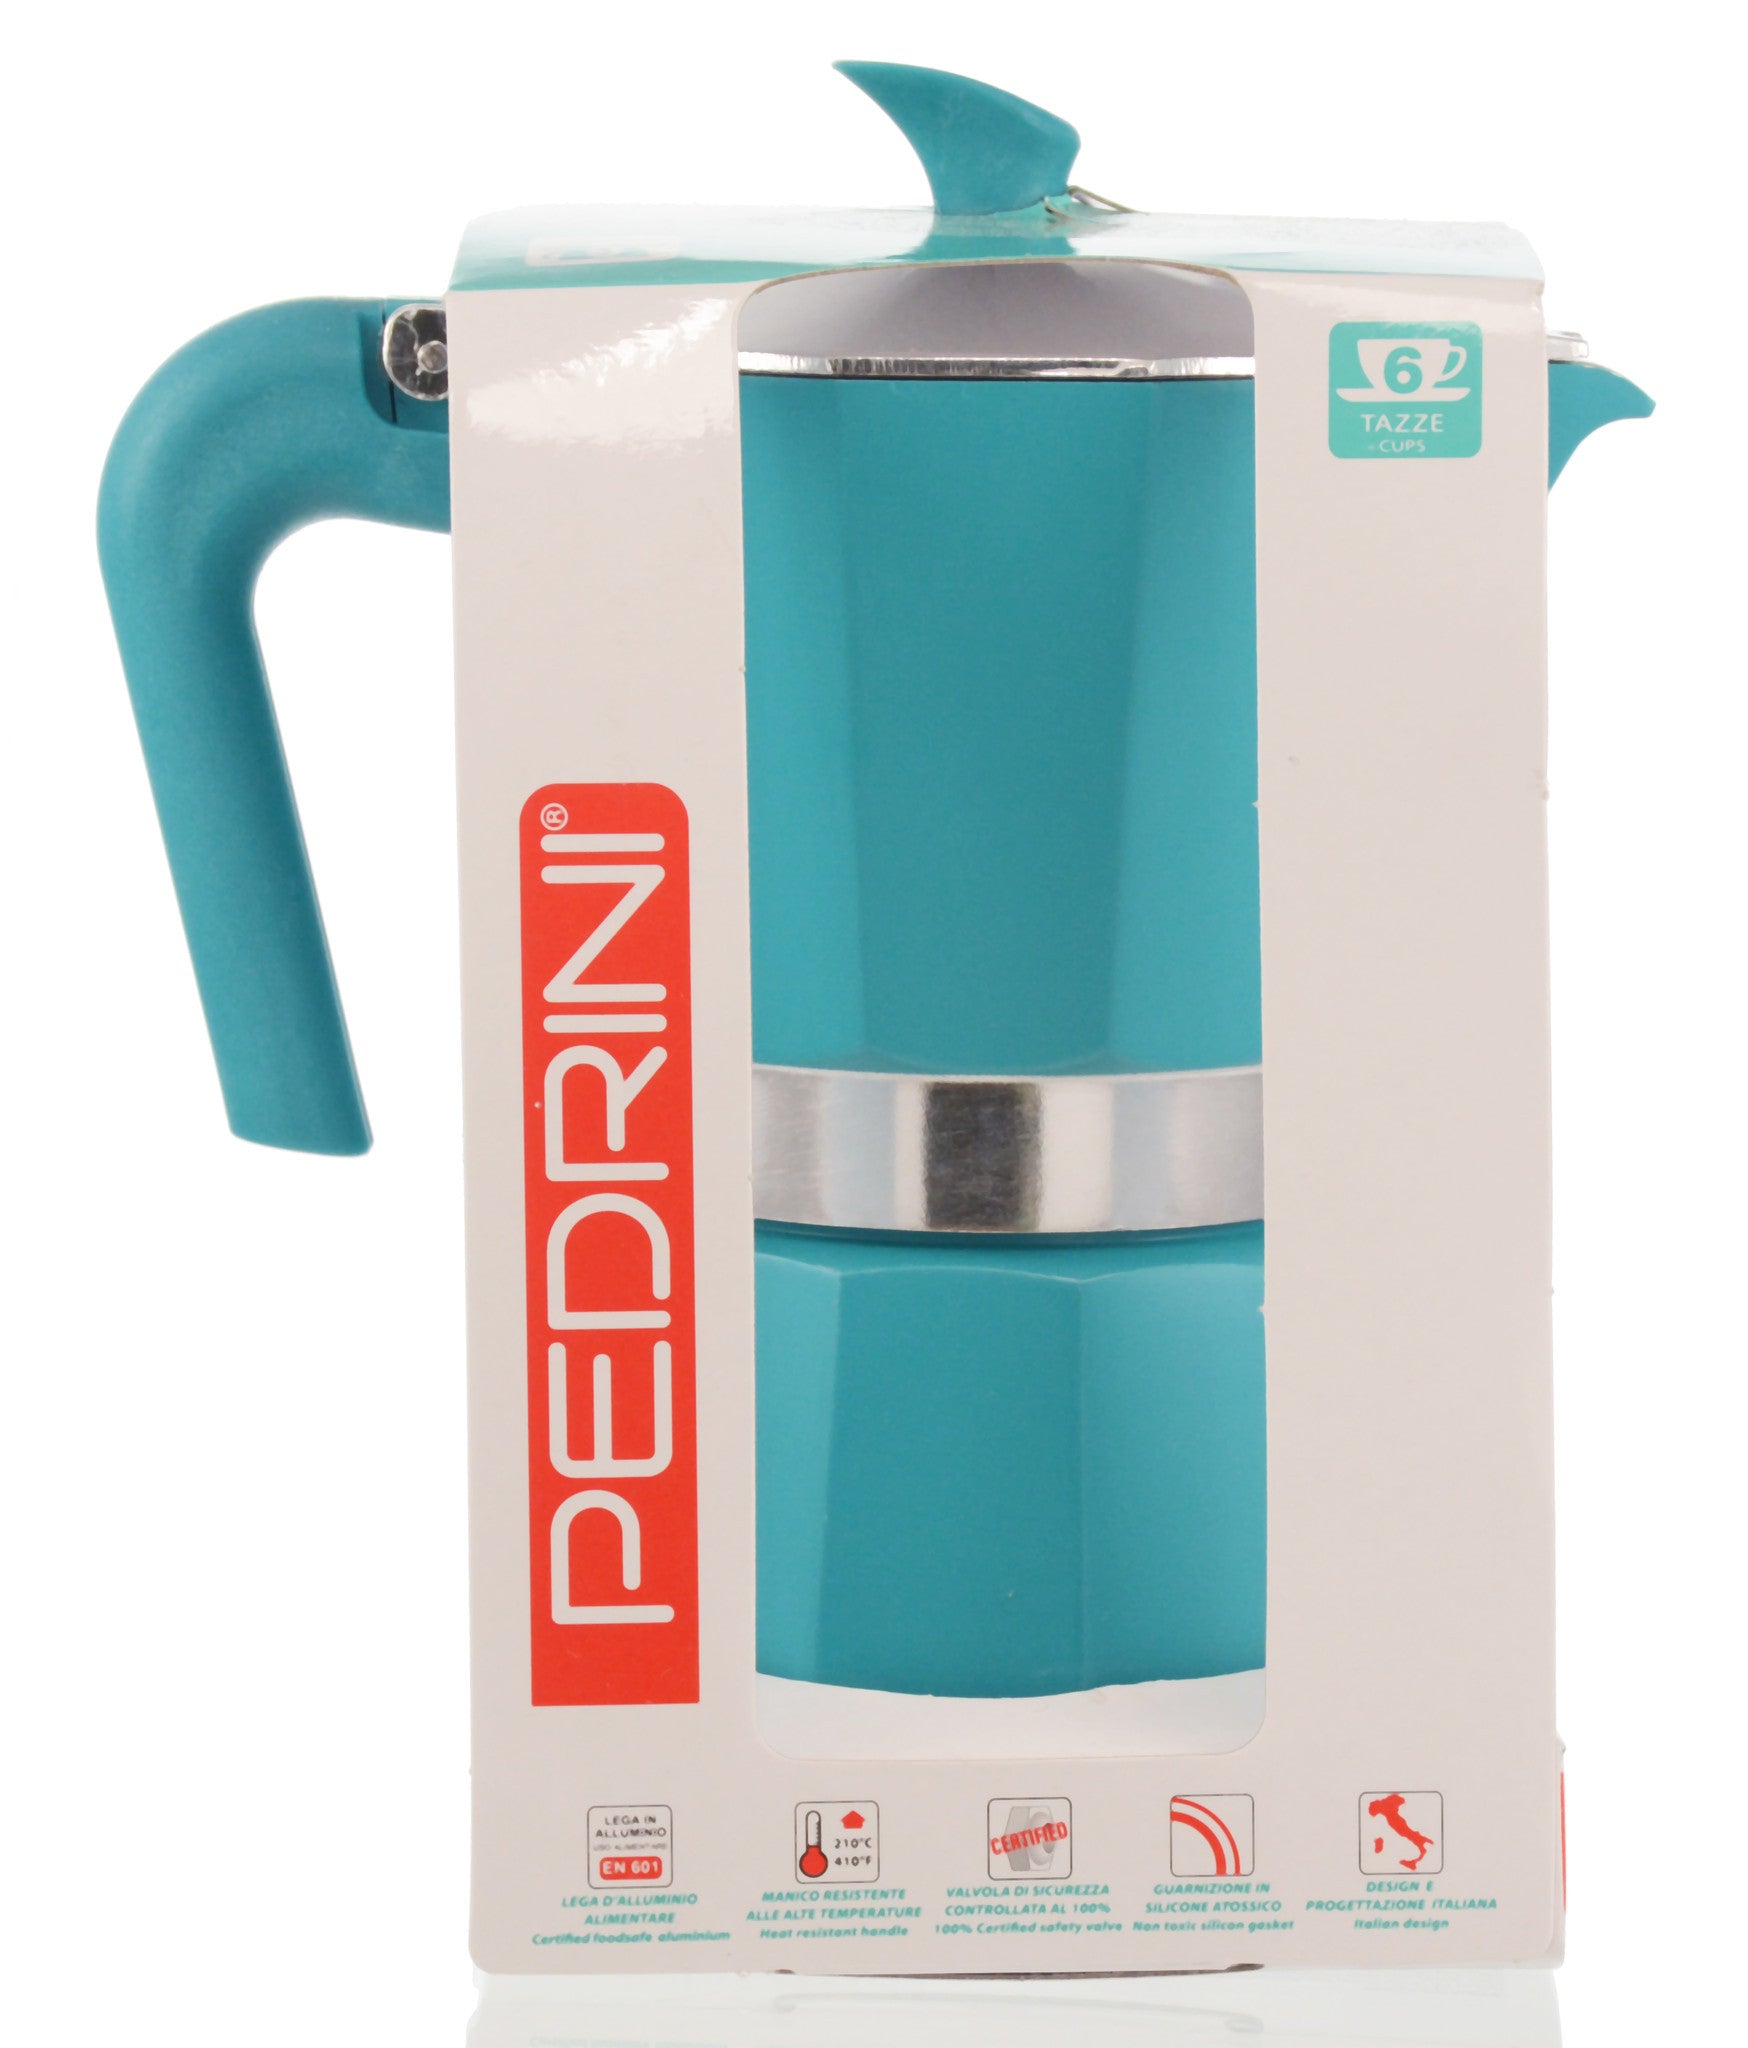 TXON Stores Your choice for home products.. Pedrini - Pressure Steel Coffee  Maker - 13 x 9 x 18 Cm